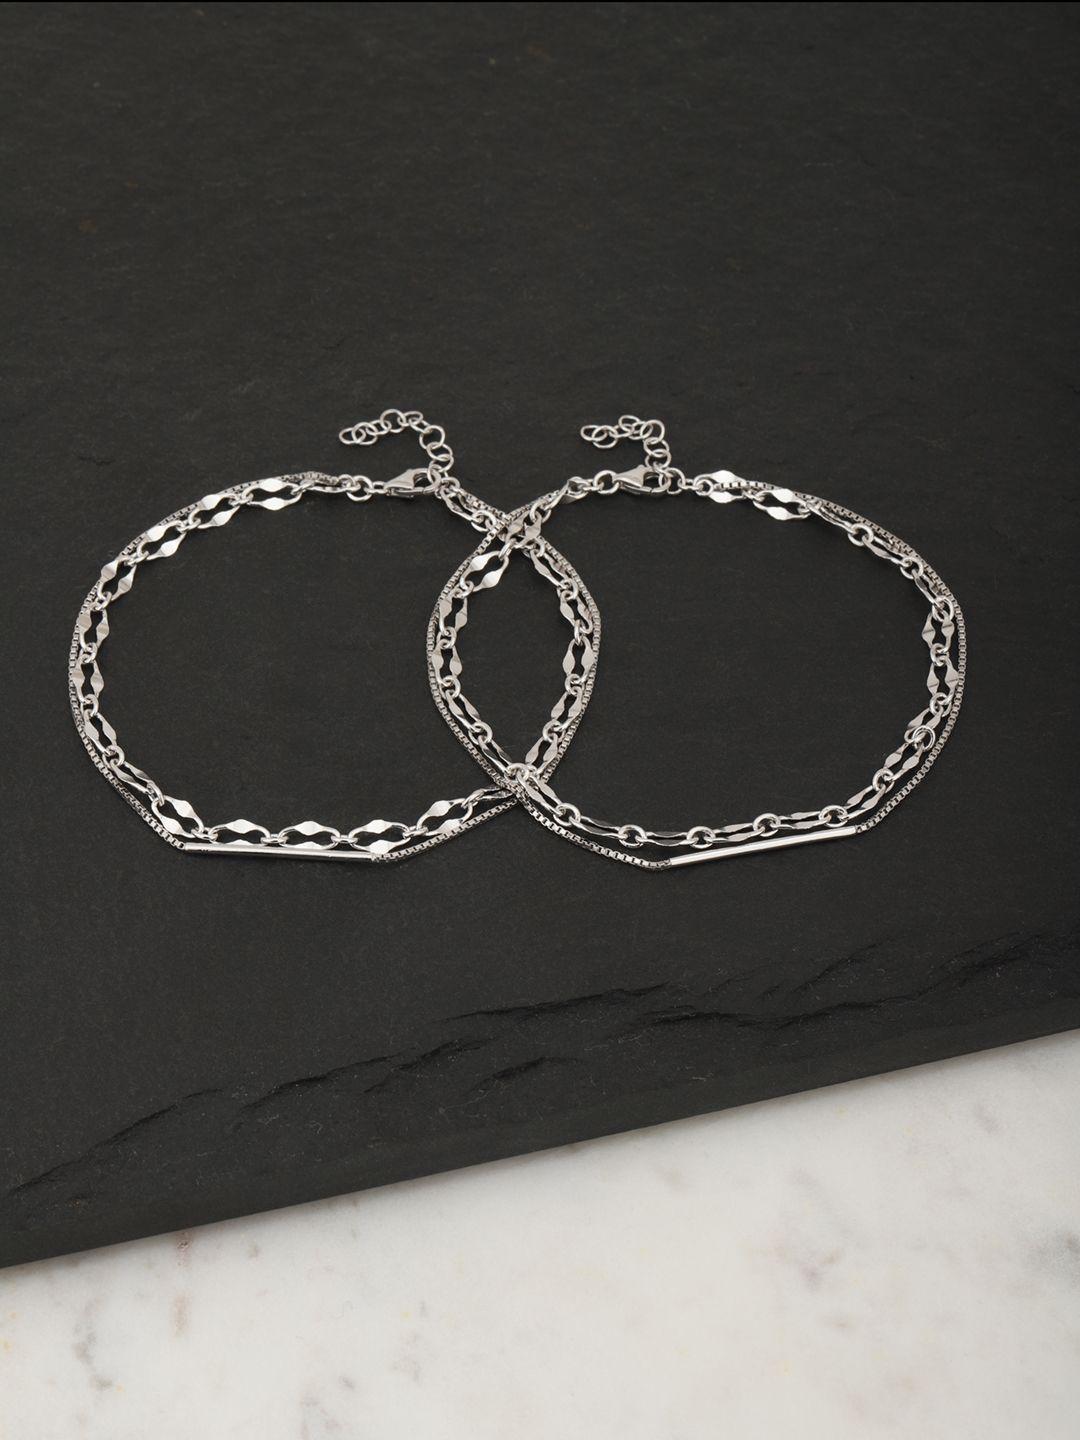 carlton london set of 2 silver-toned rhodium-plated layered anklets